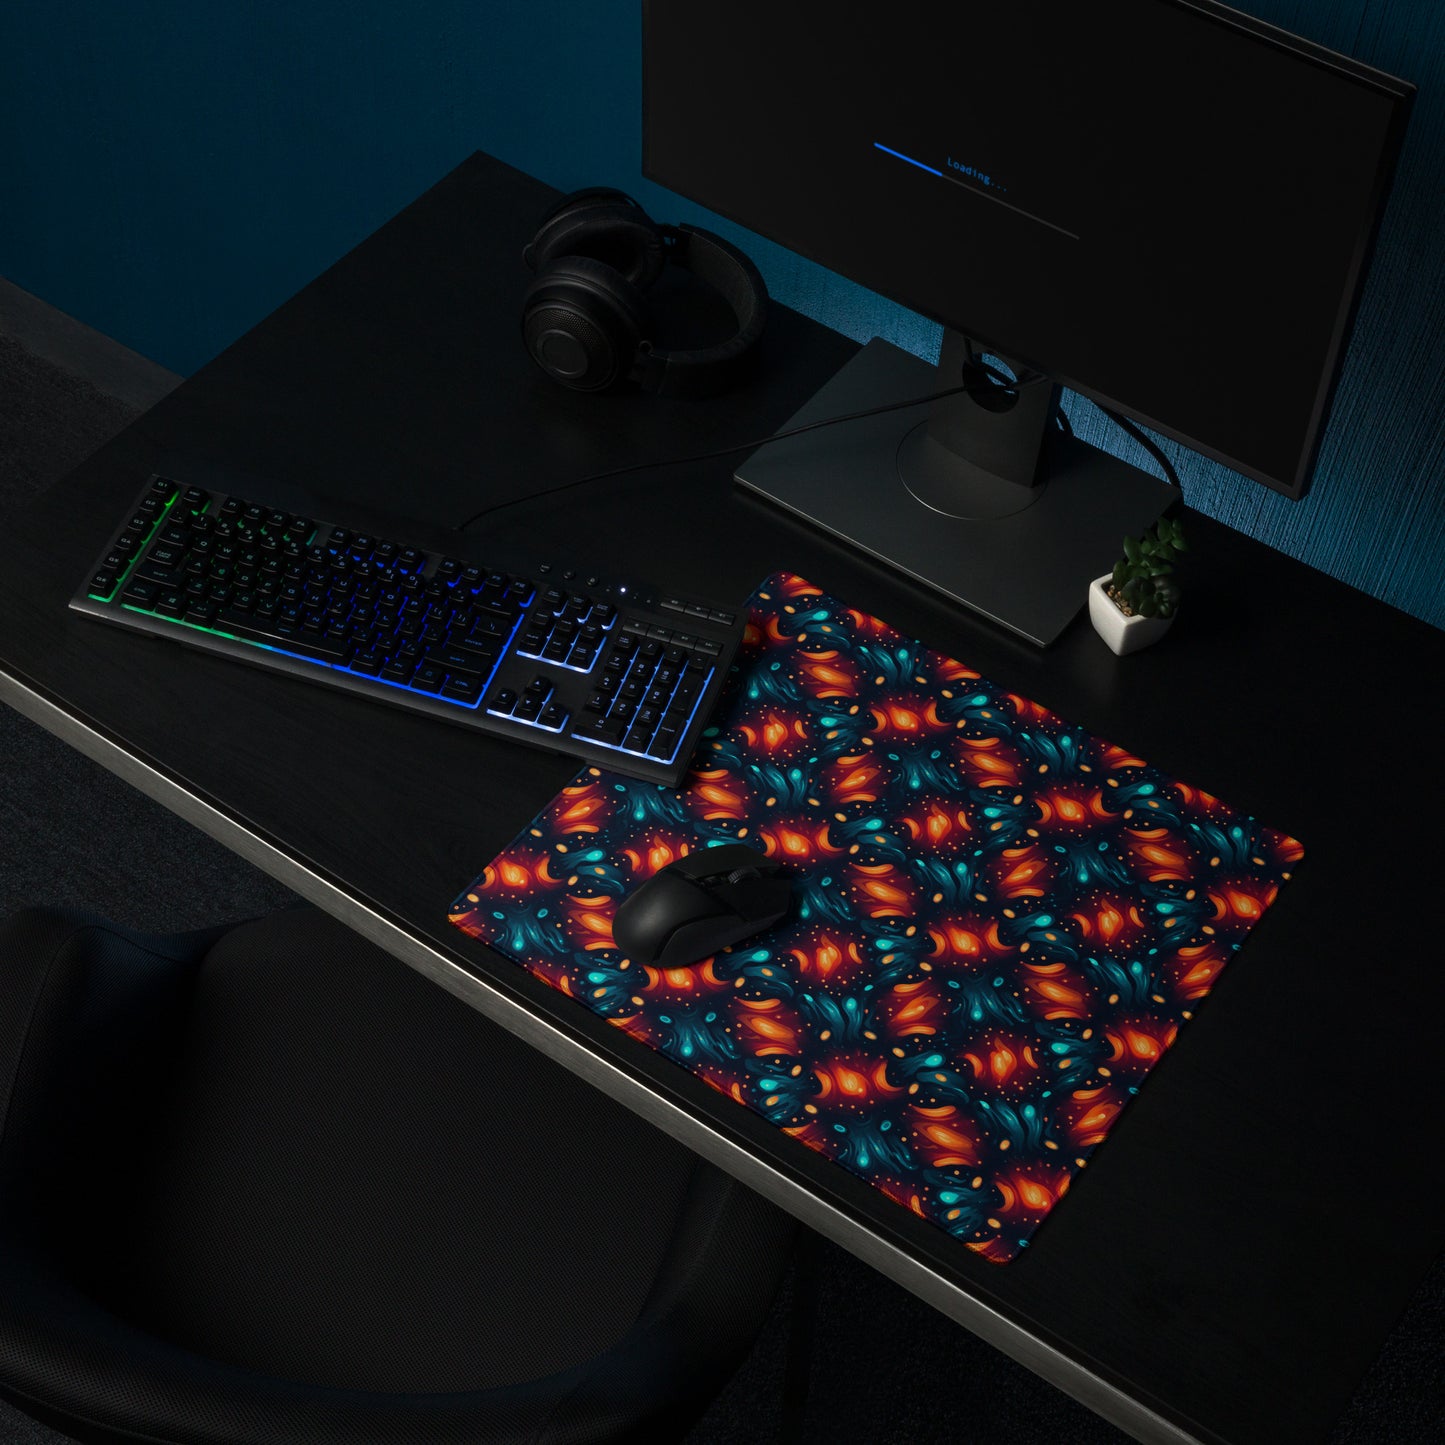 A 18" x 16" desk pad with a blue and orange abstract cross hatch pattern sitting on a desk.